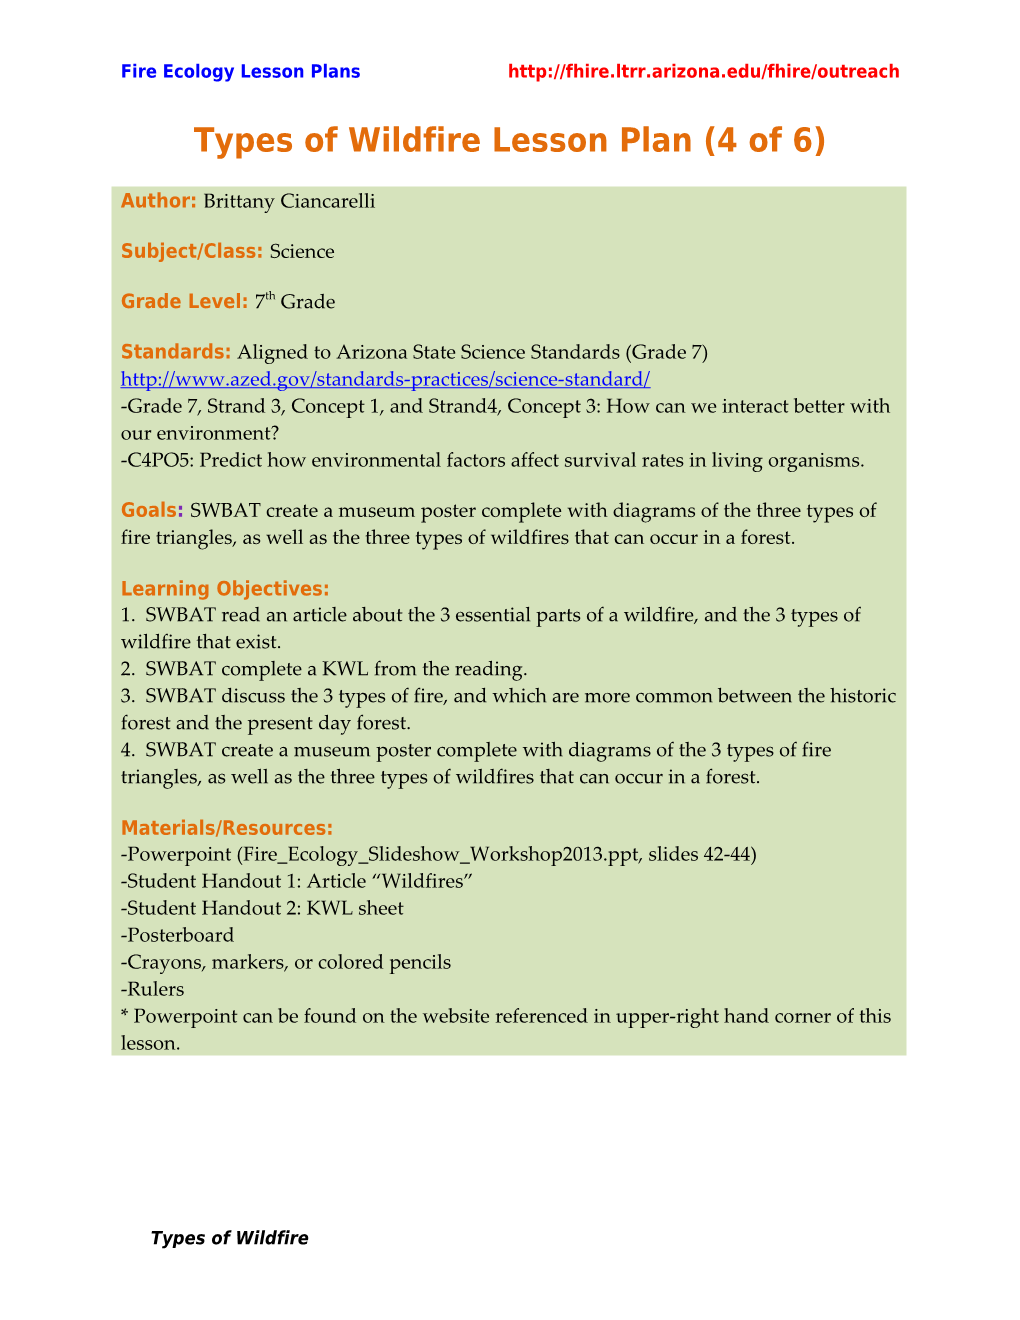 Types of Wildfire Lesson Plan (4 of 6)